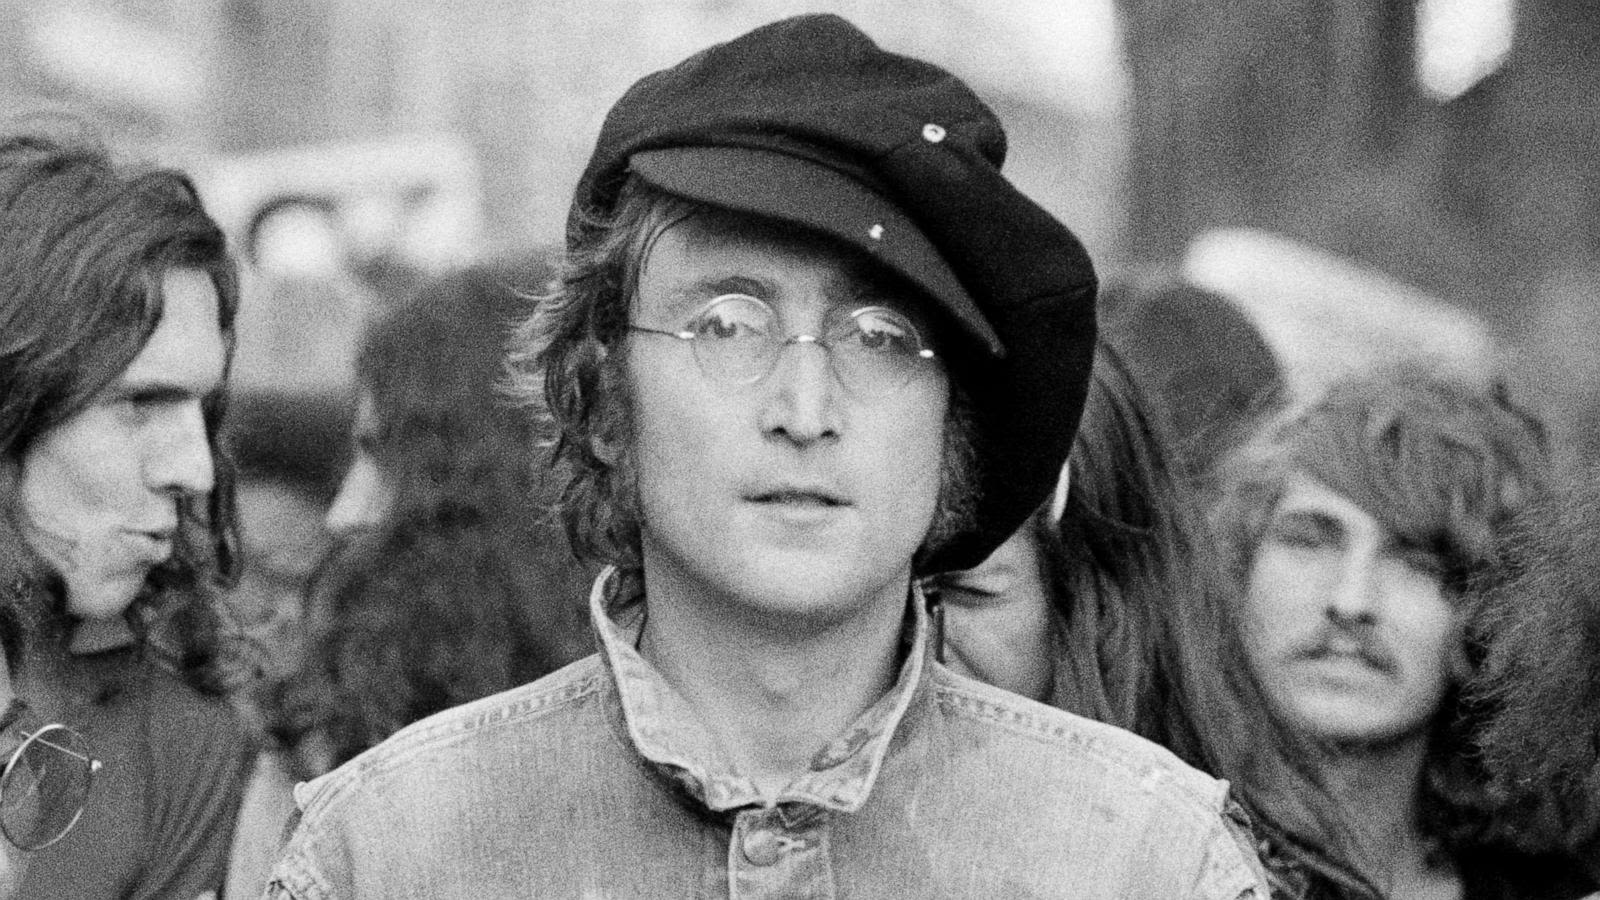 John Lennon's 'Help!' guitar sells for a record $2.9 million at auction